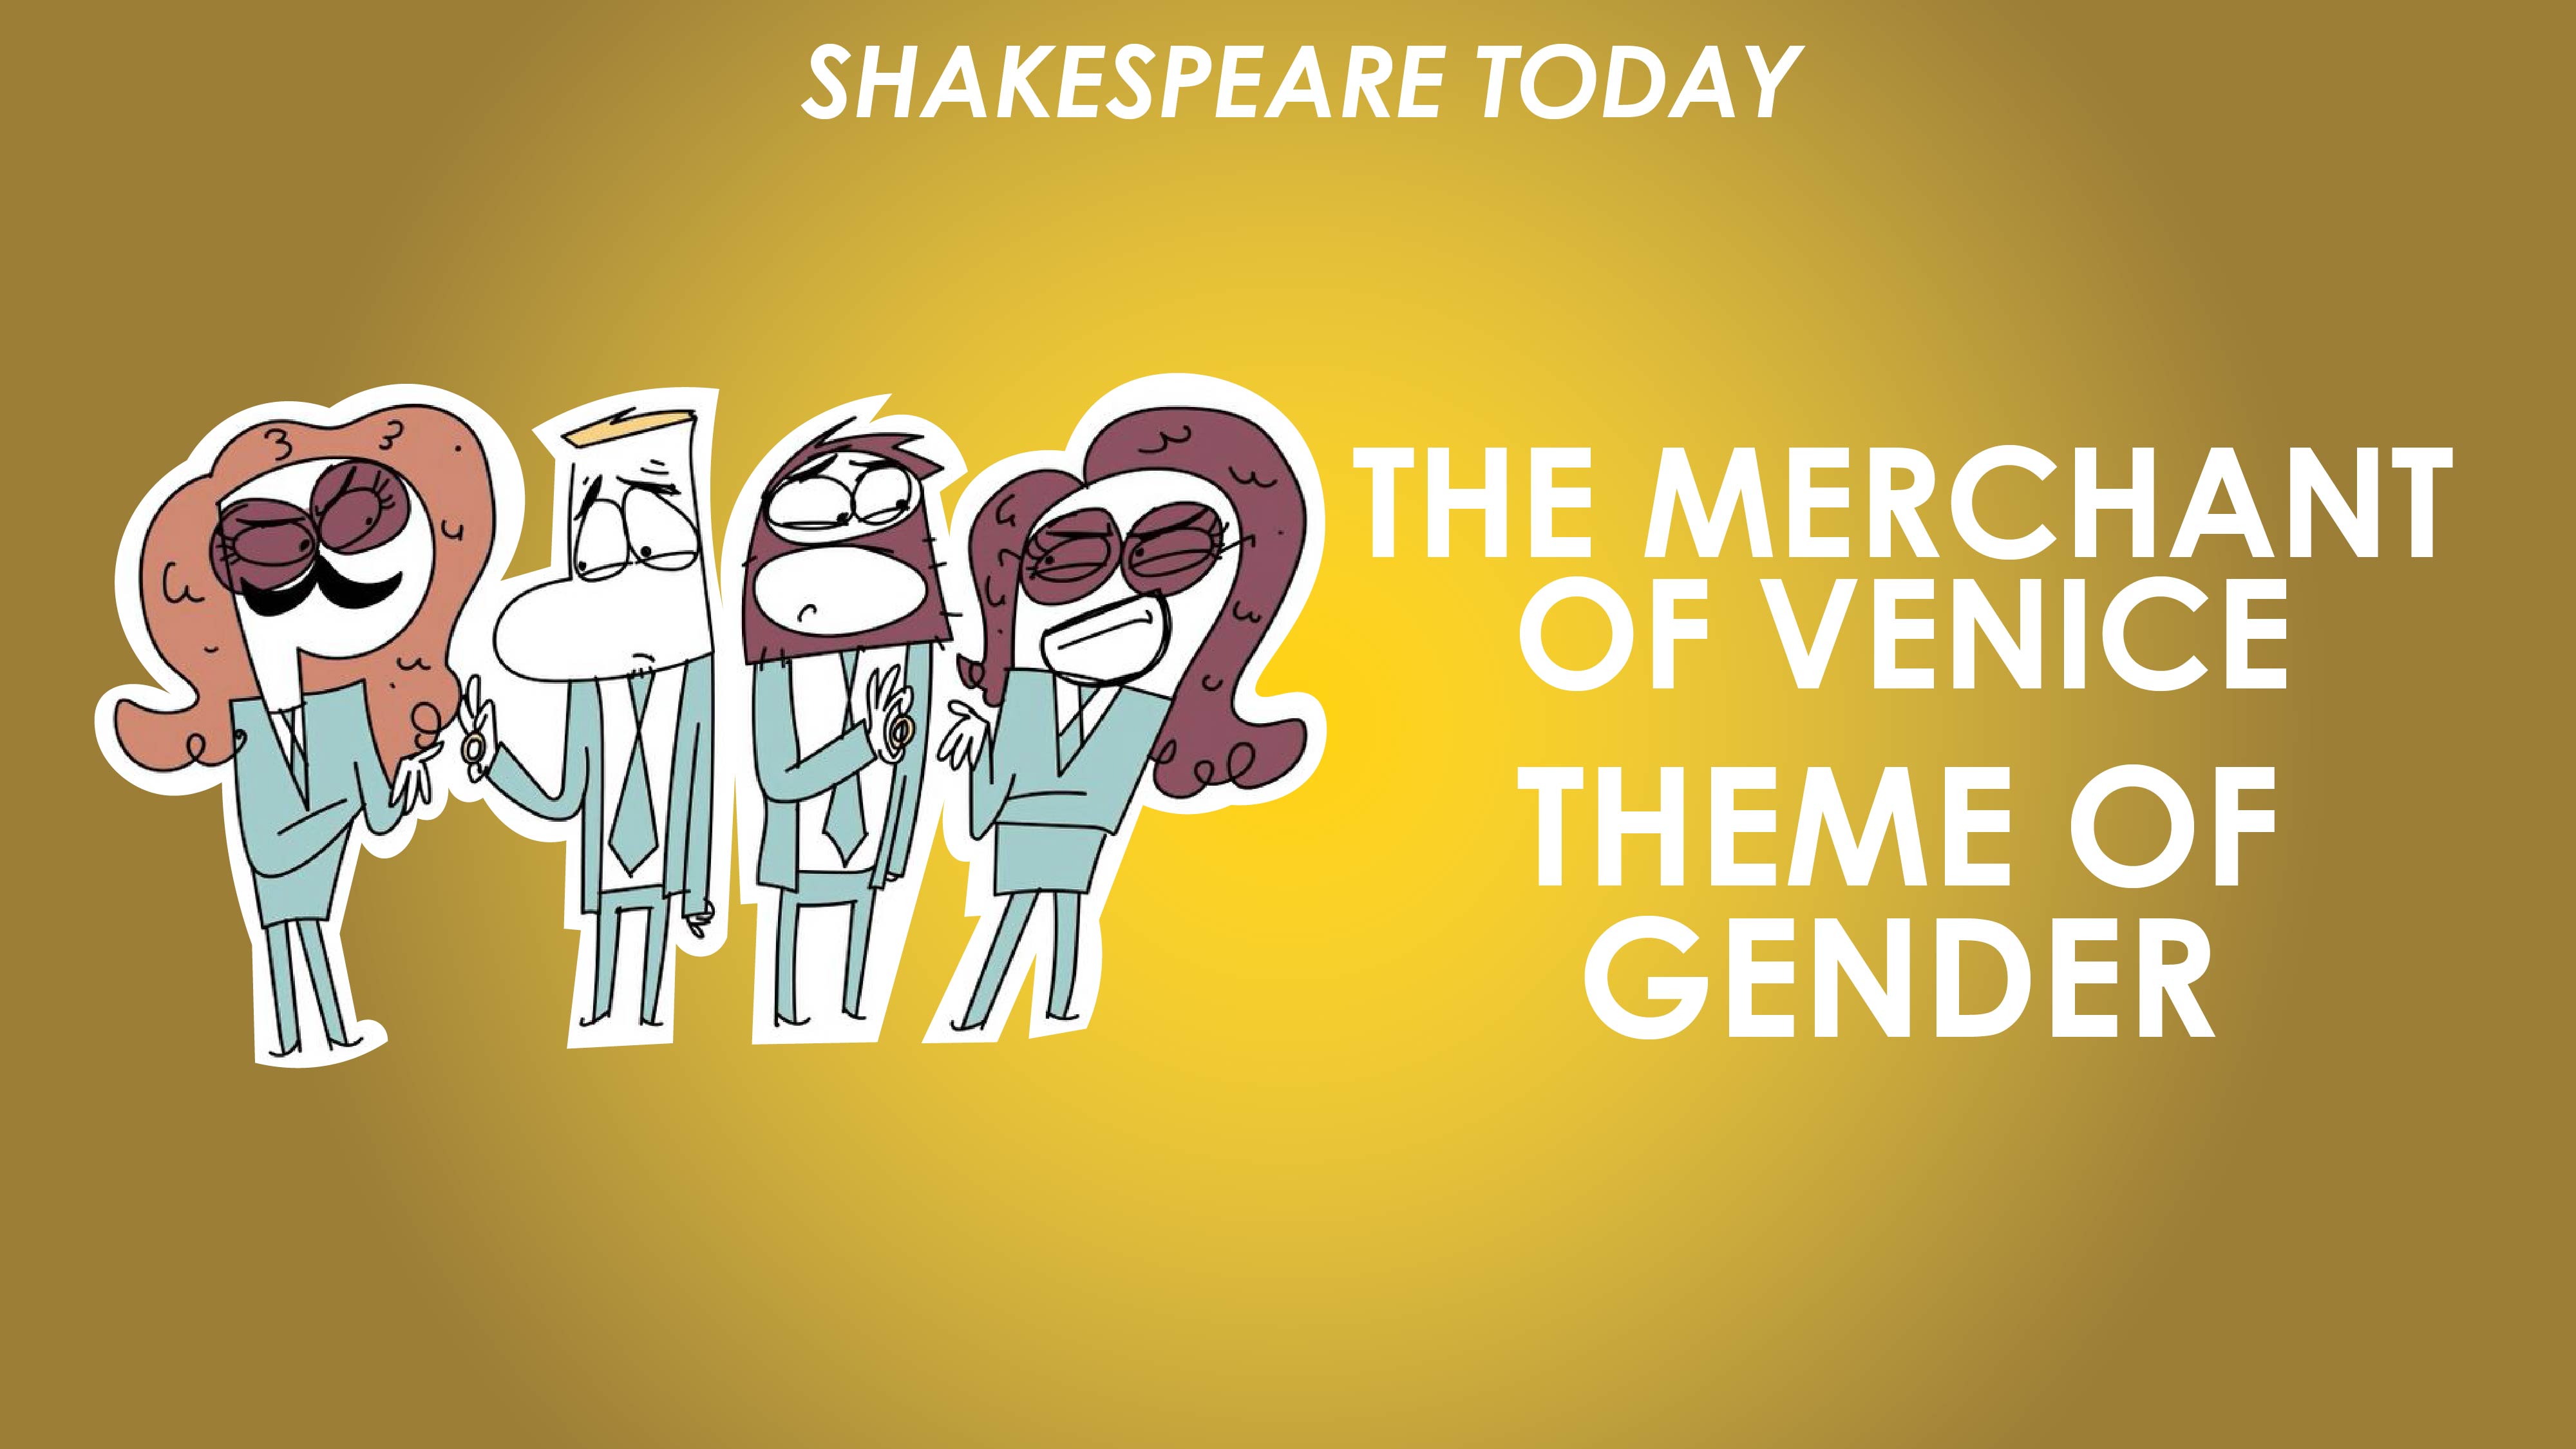 The Merchant of Venice Theme of Gender - Shakespeare Today Series